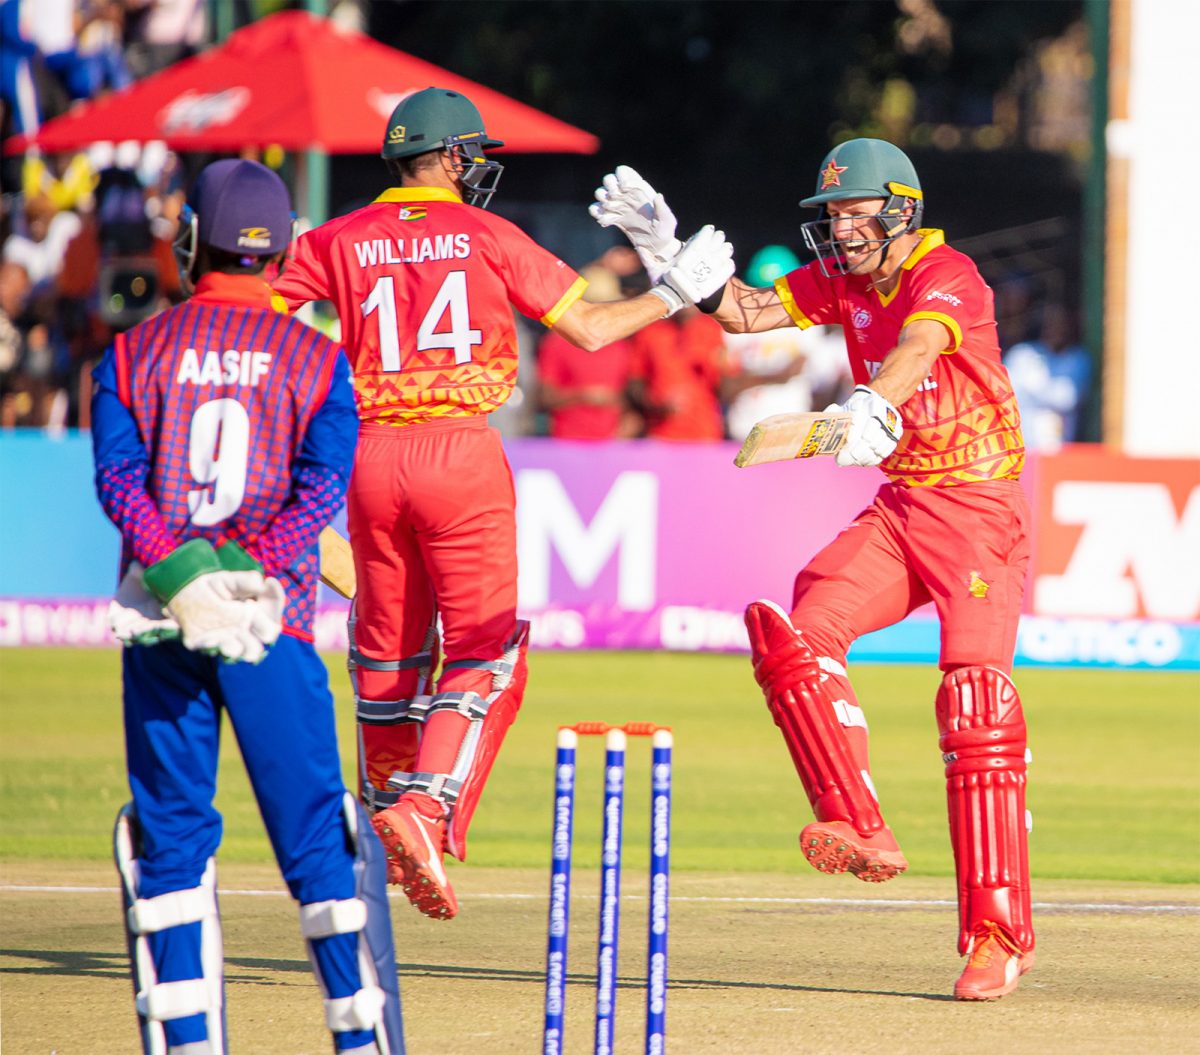 The Zimbabwe players  celebrate their win over Nepal.